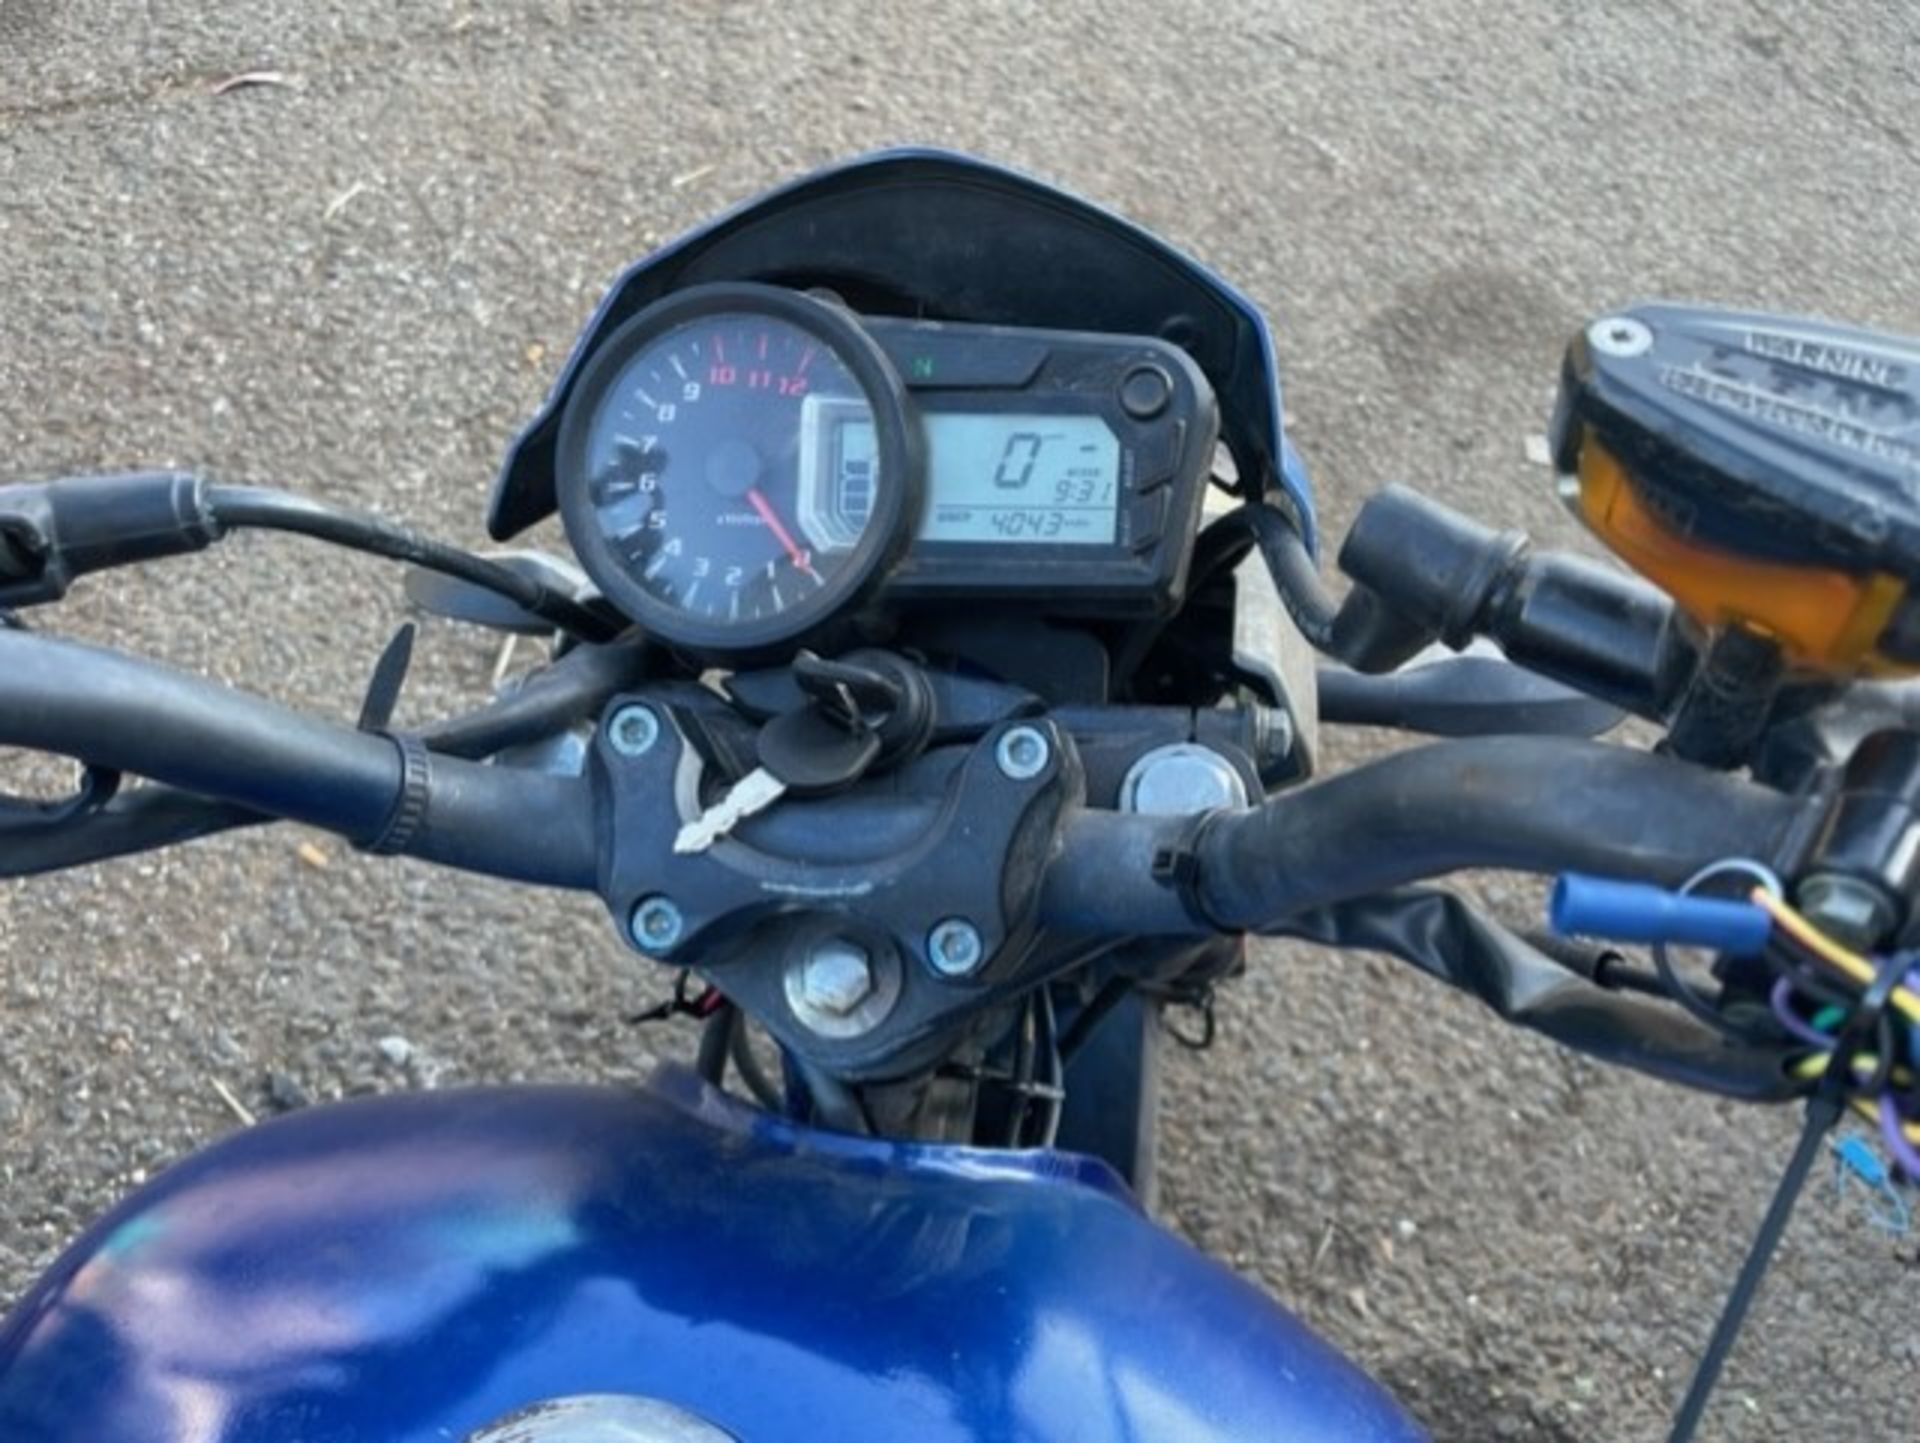 Zonnis 125 motorbike 4027 miles on the clock , MOT'D untill 25/05/24 - Image 7 of 8